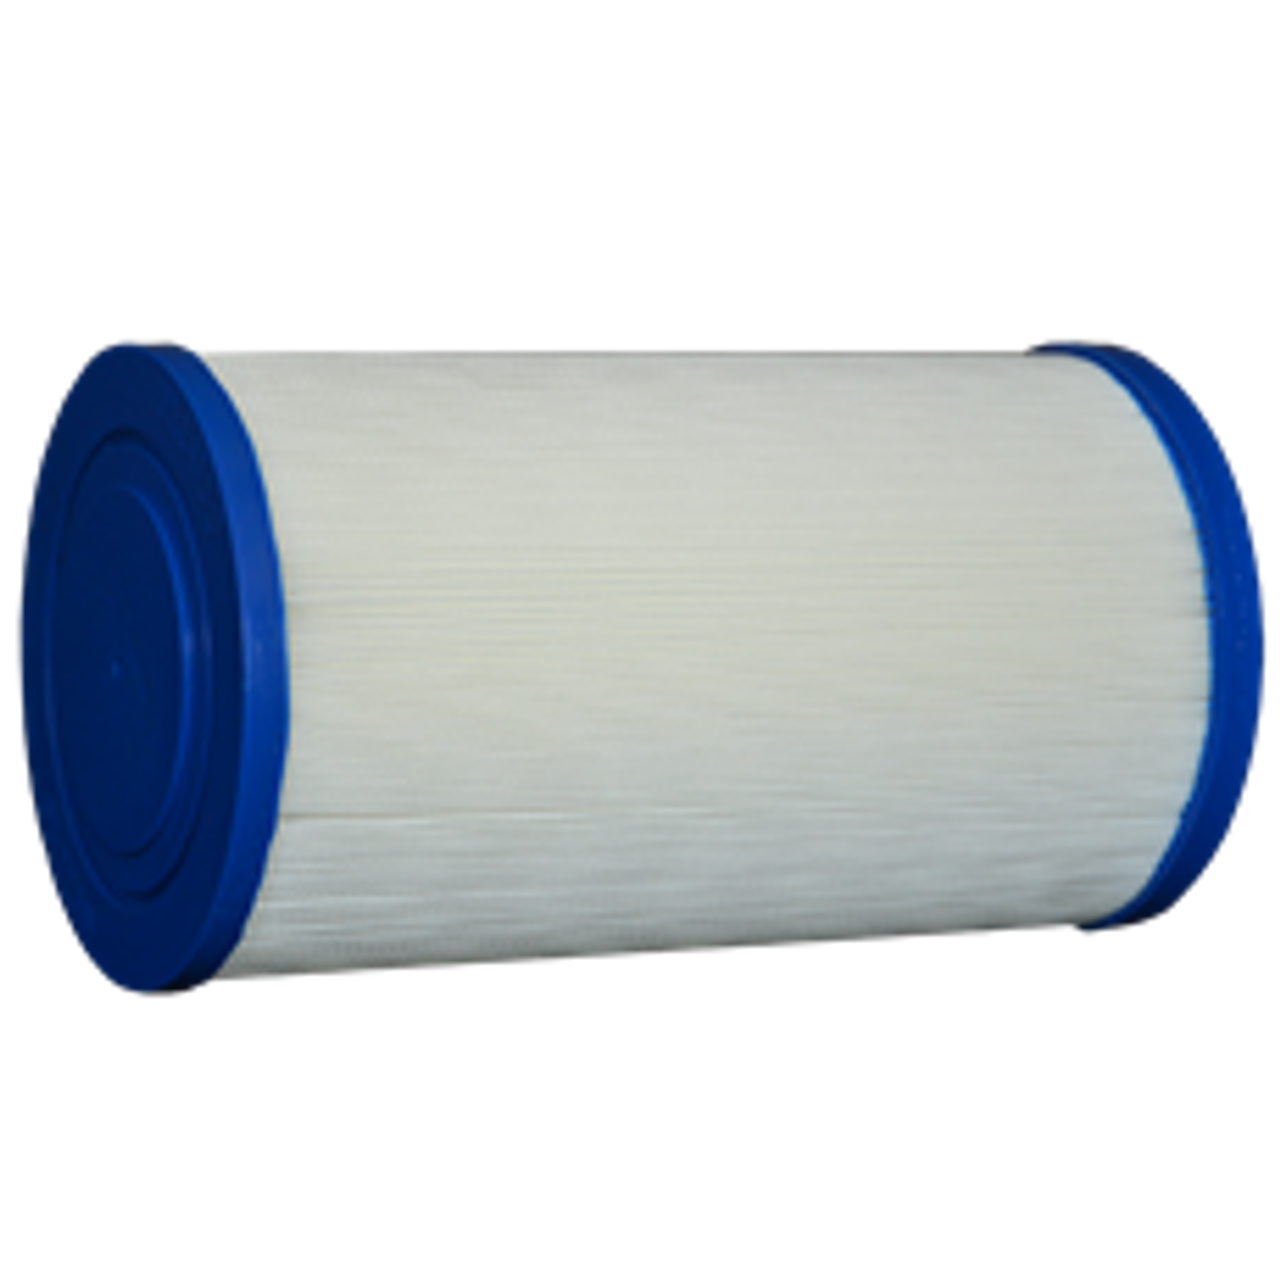 Pleatco PVT25N-P4 Filter Cartridge Replaces FC-0186